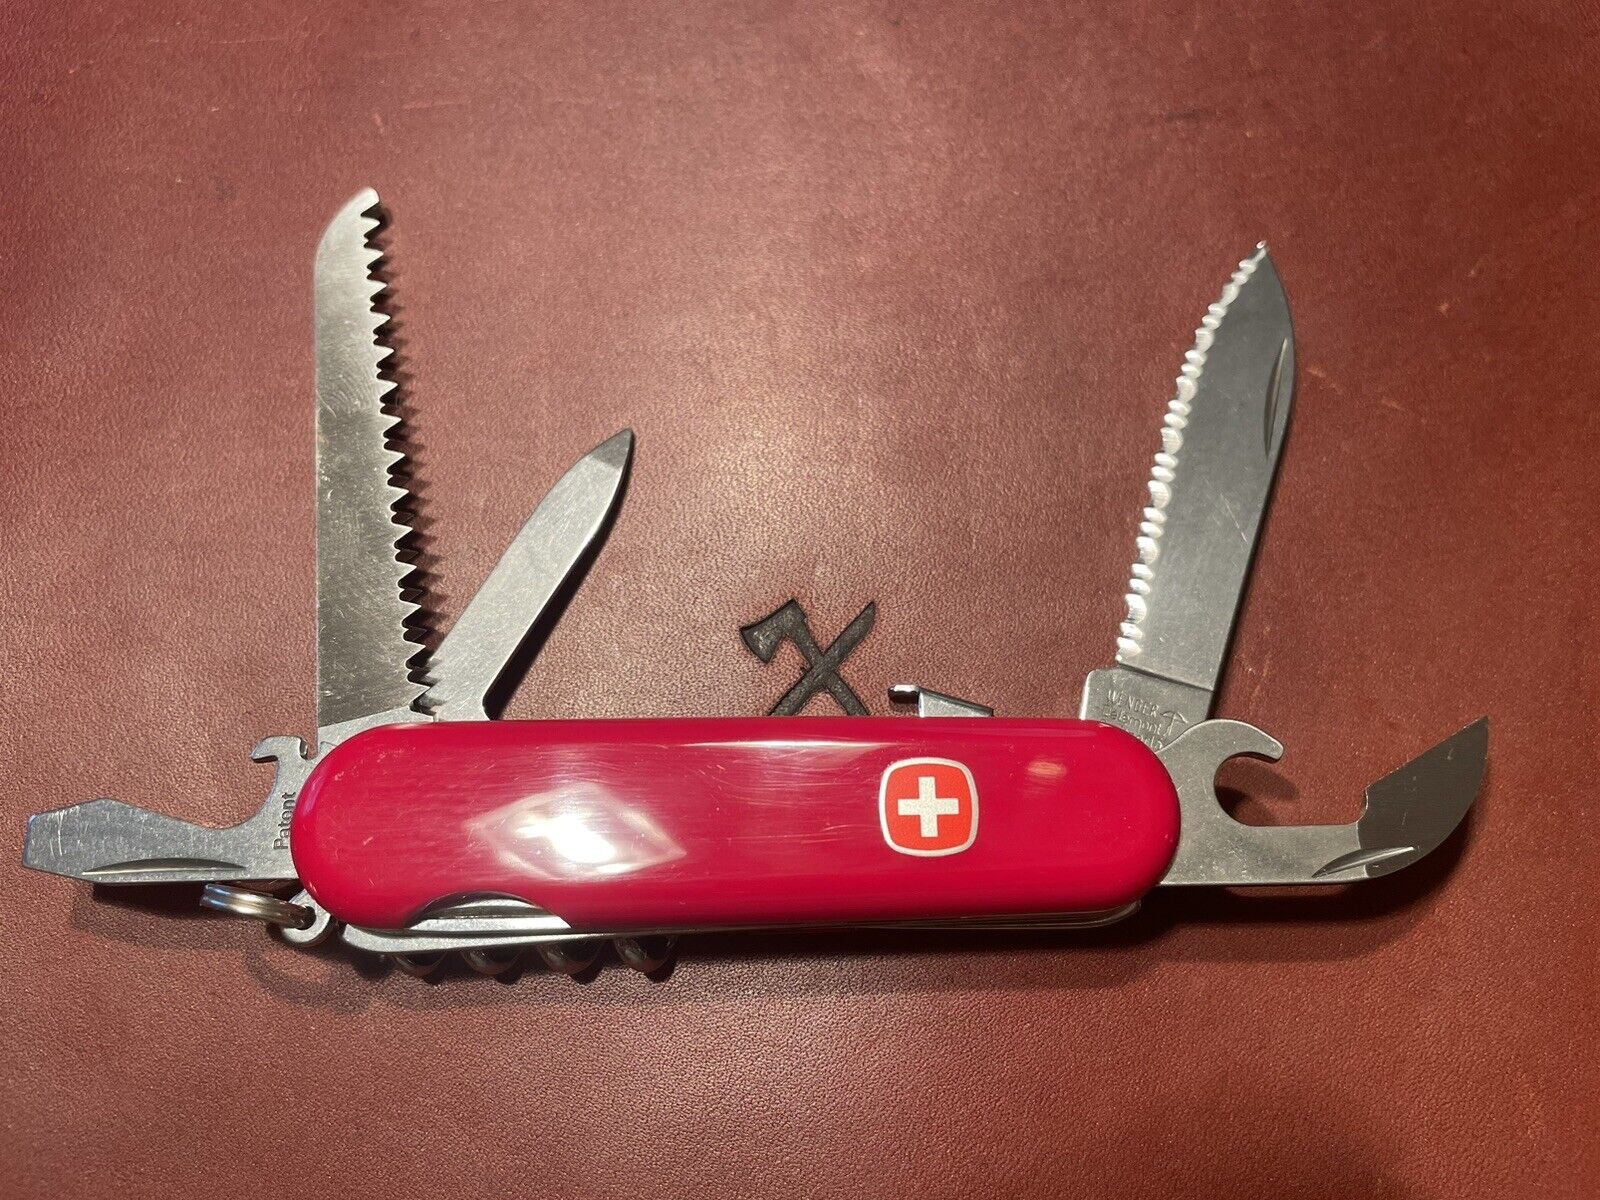 Wenger Swiss Army Knife Backpacker II Locking Serrated Blade- New With Box- NOS